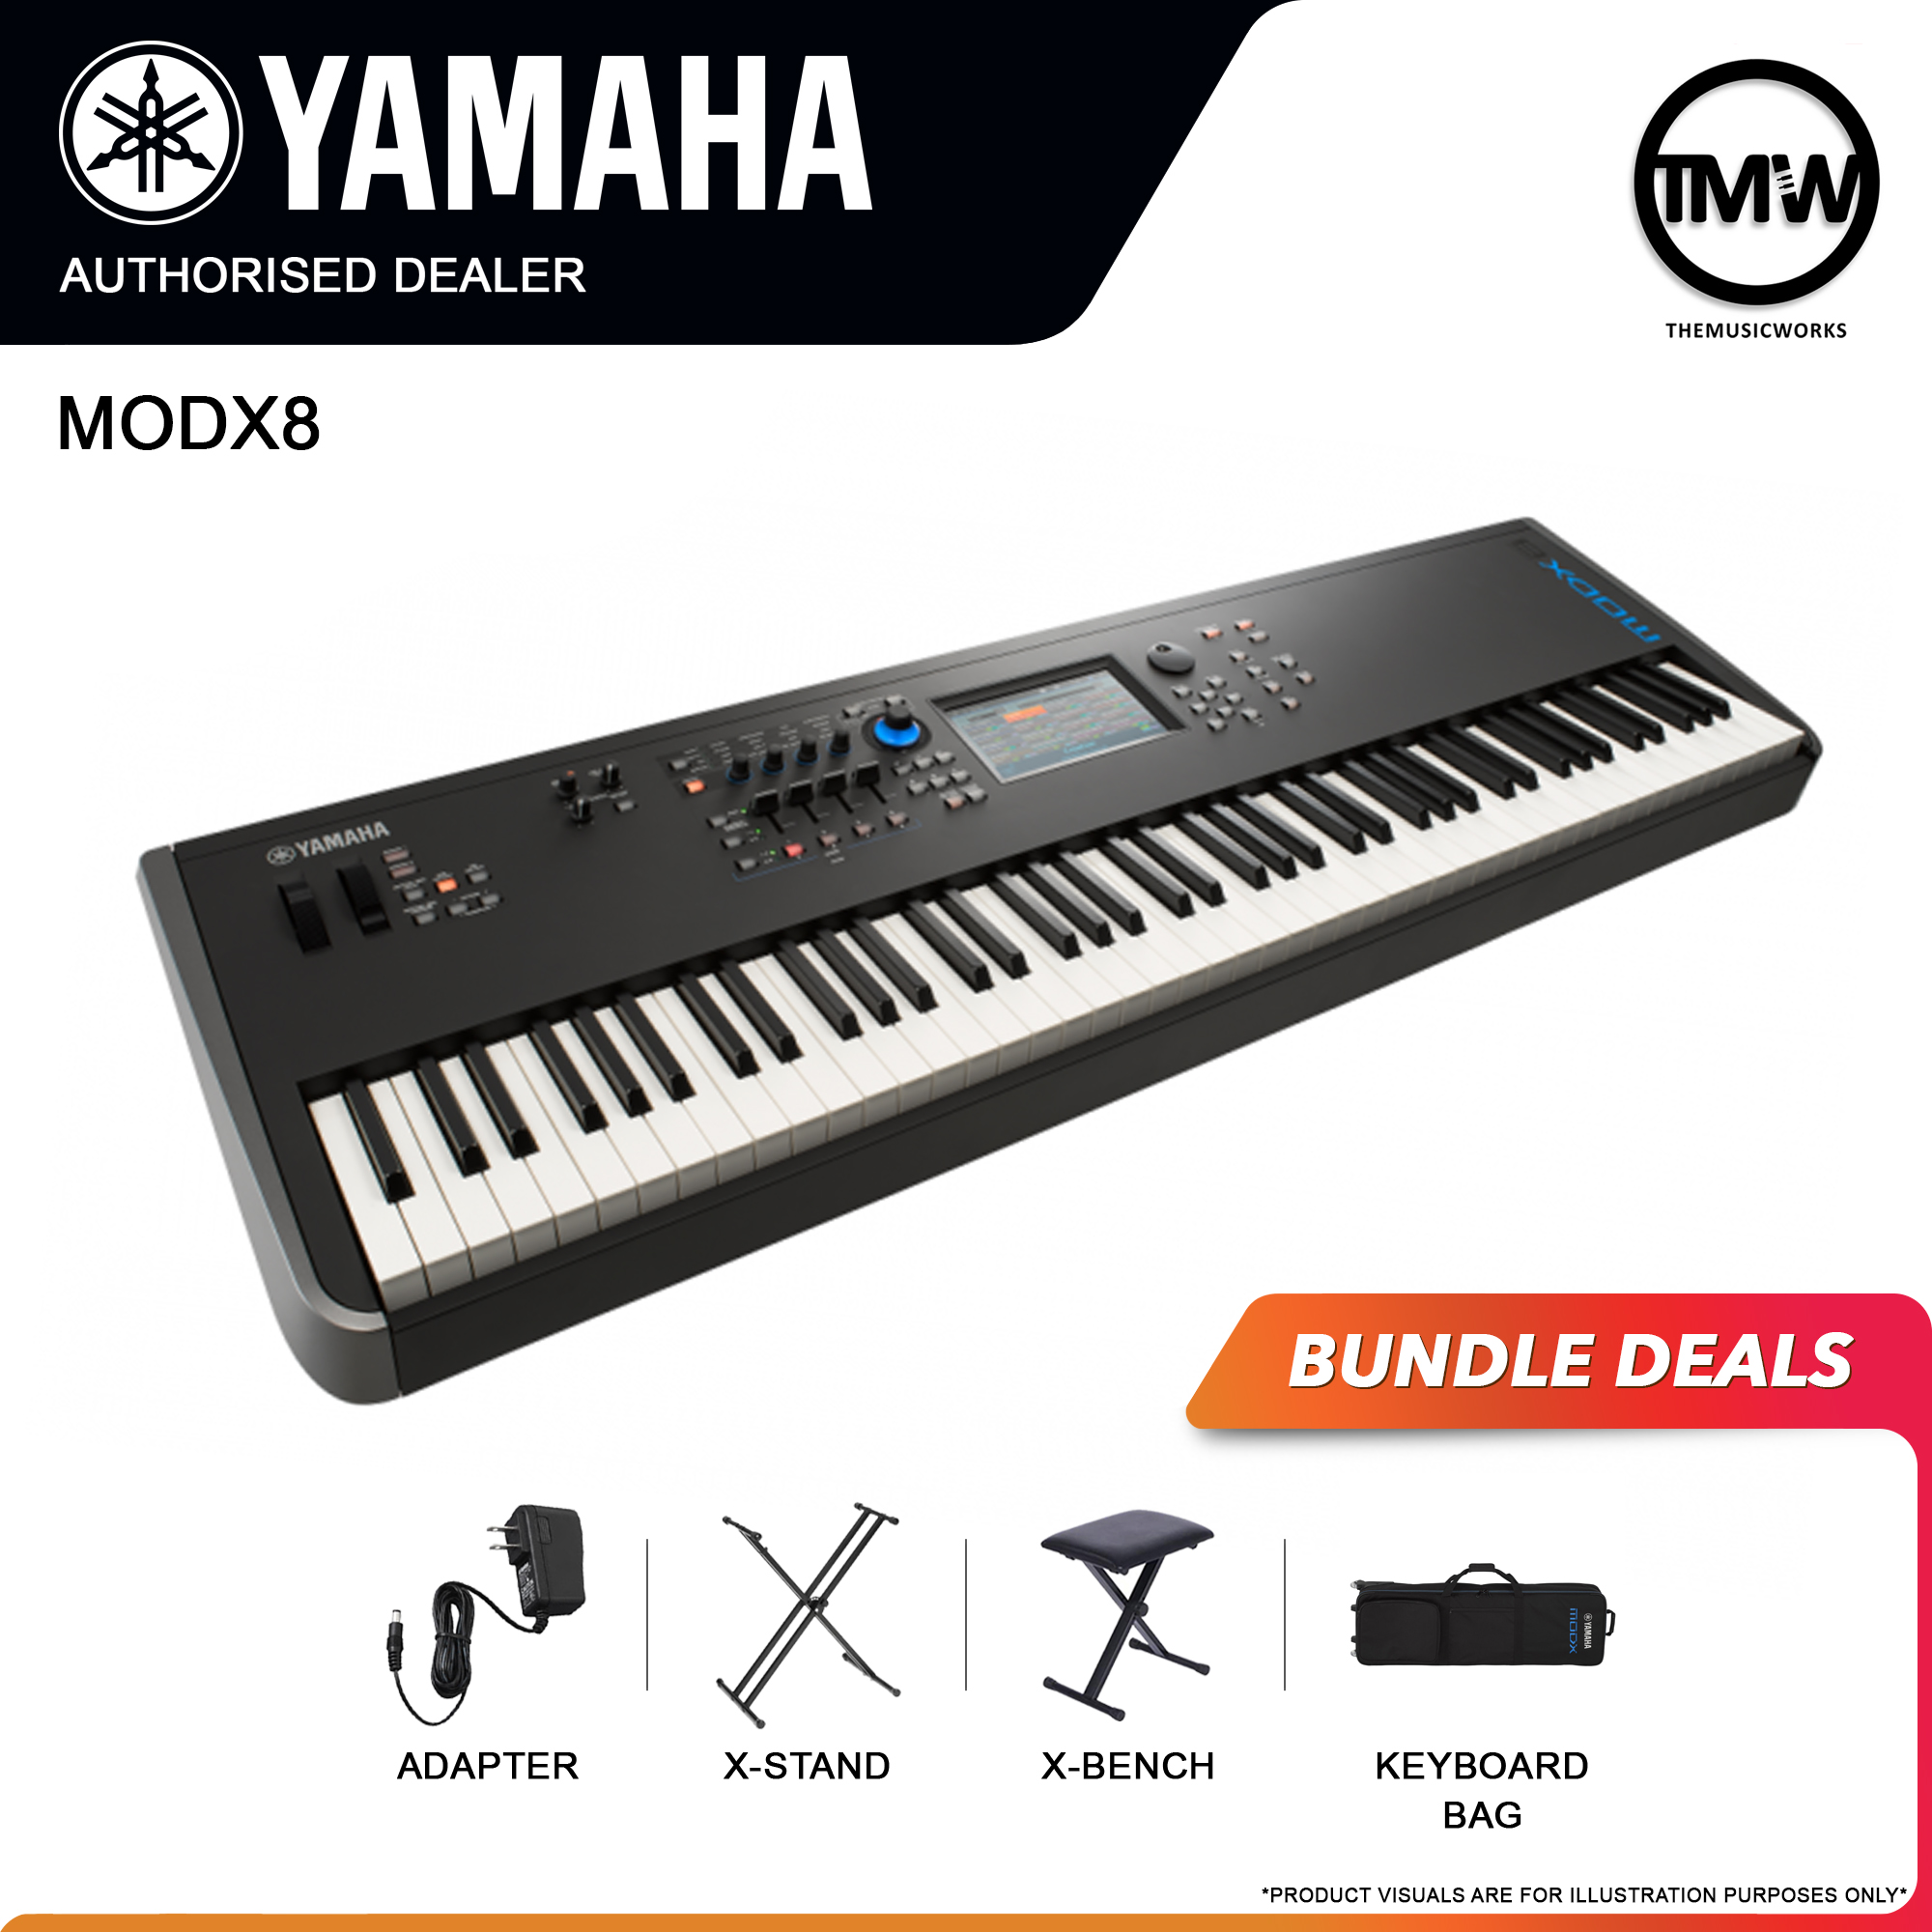 yamaha modx8 with adapter, x-stand, x-bench, and keyboard bag